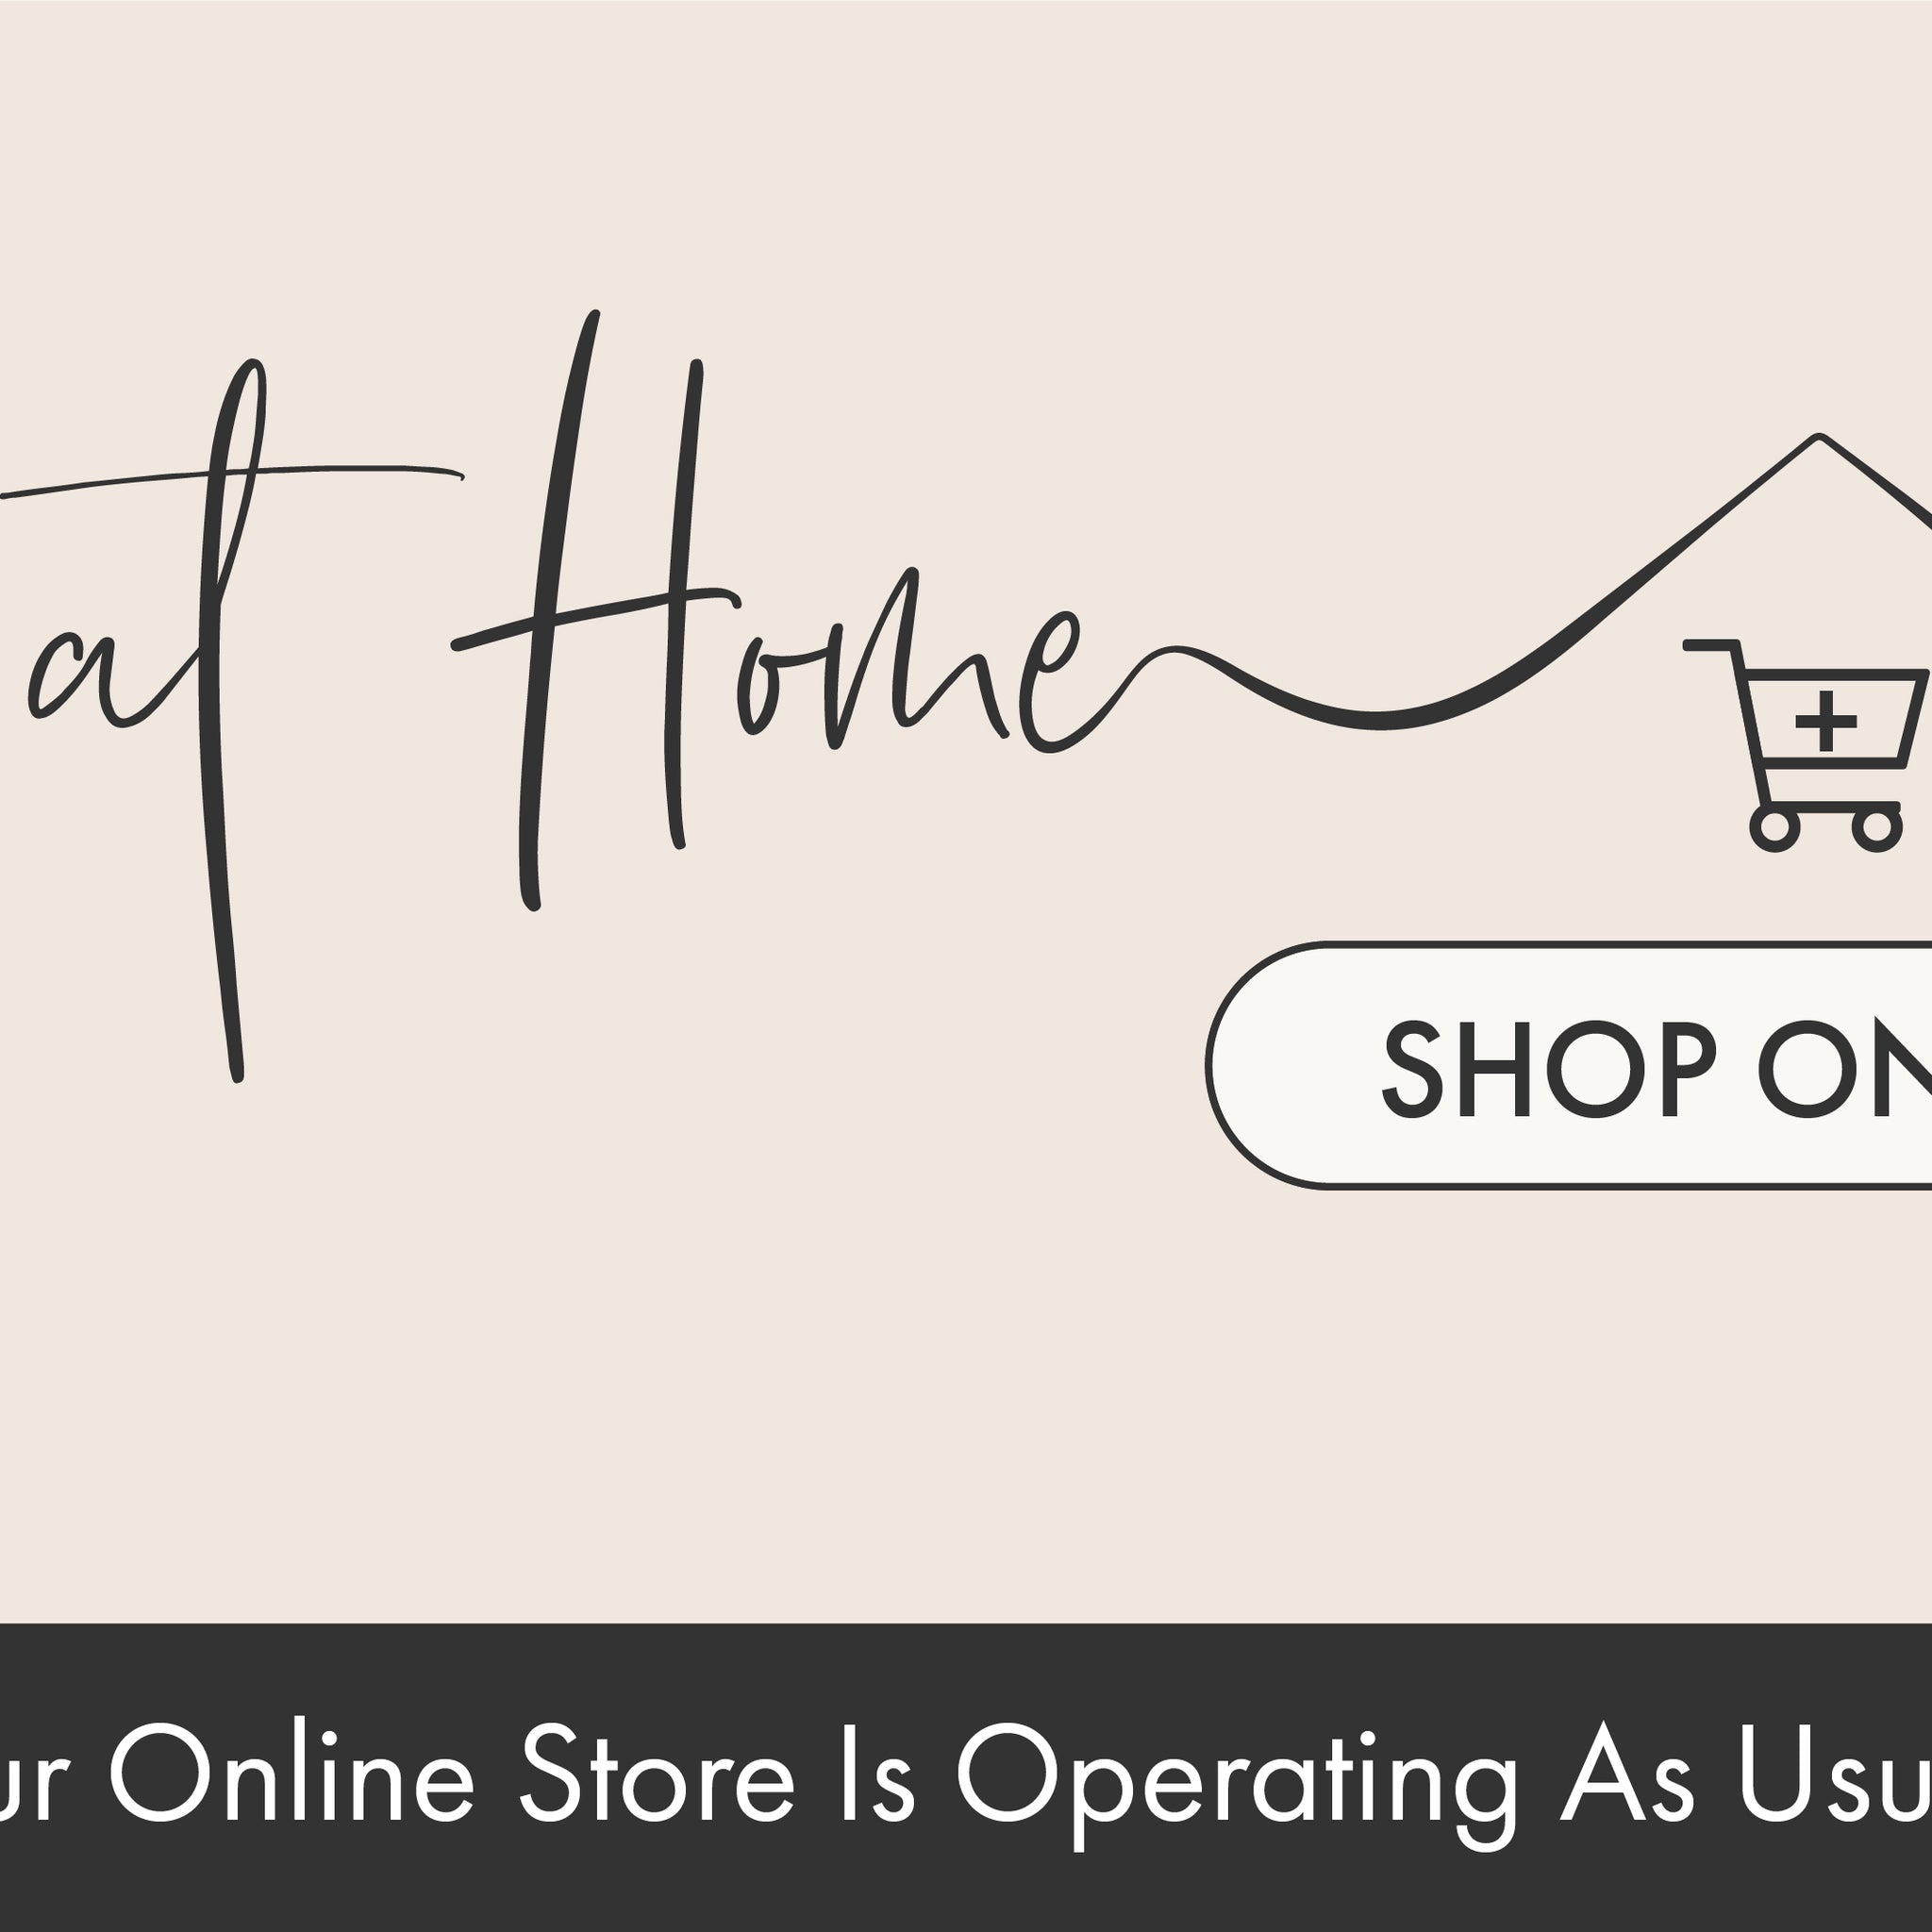 Stay at home, Shop Online.